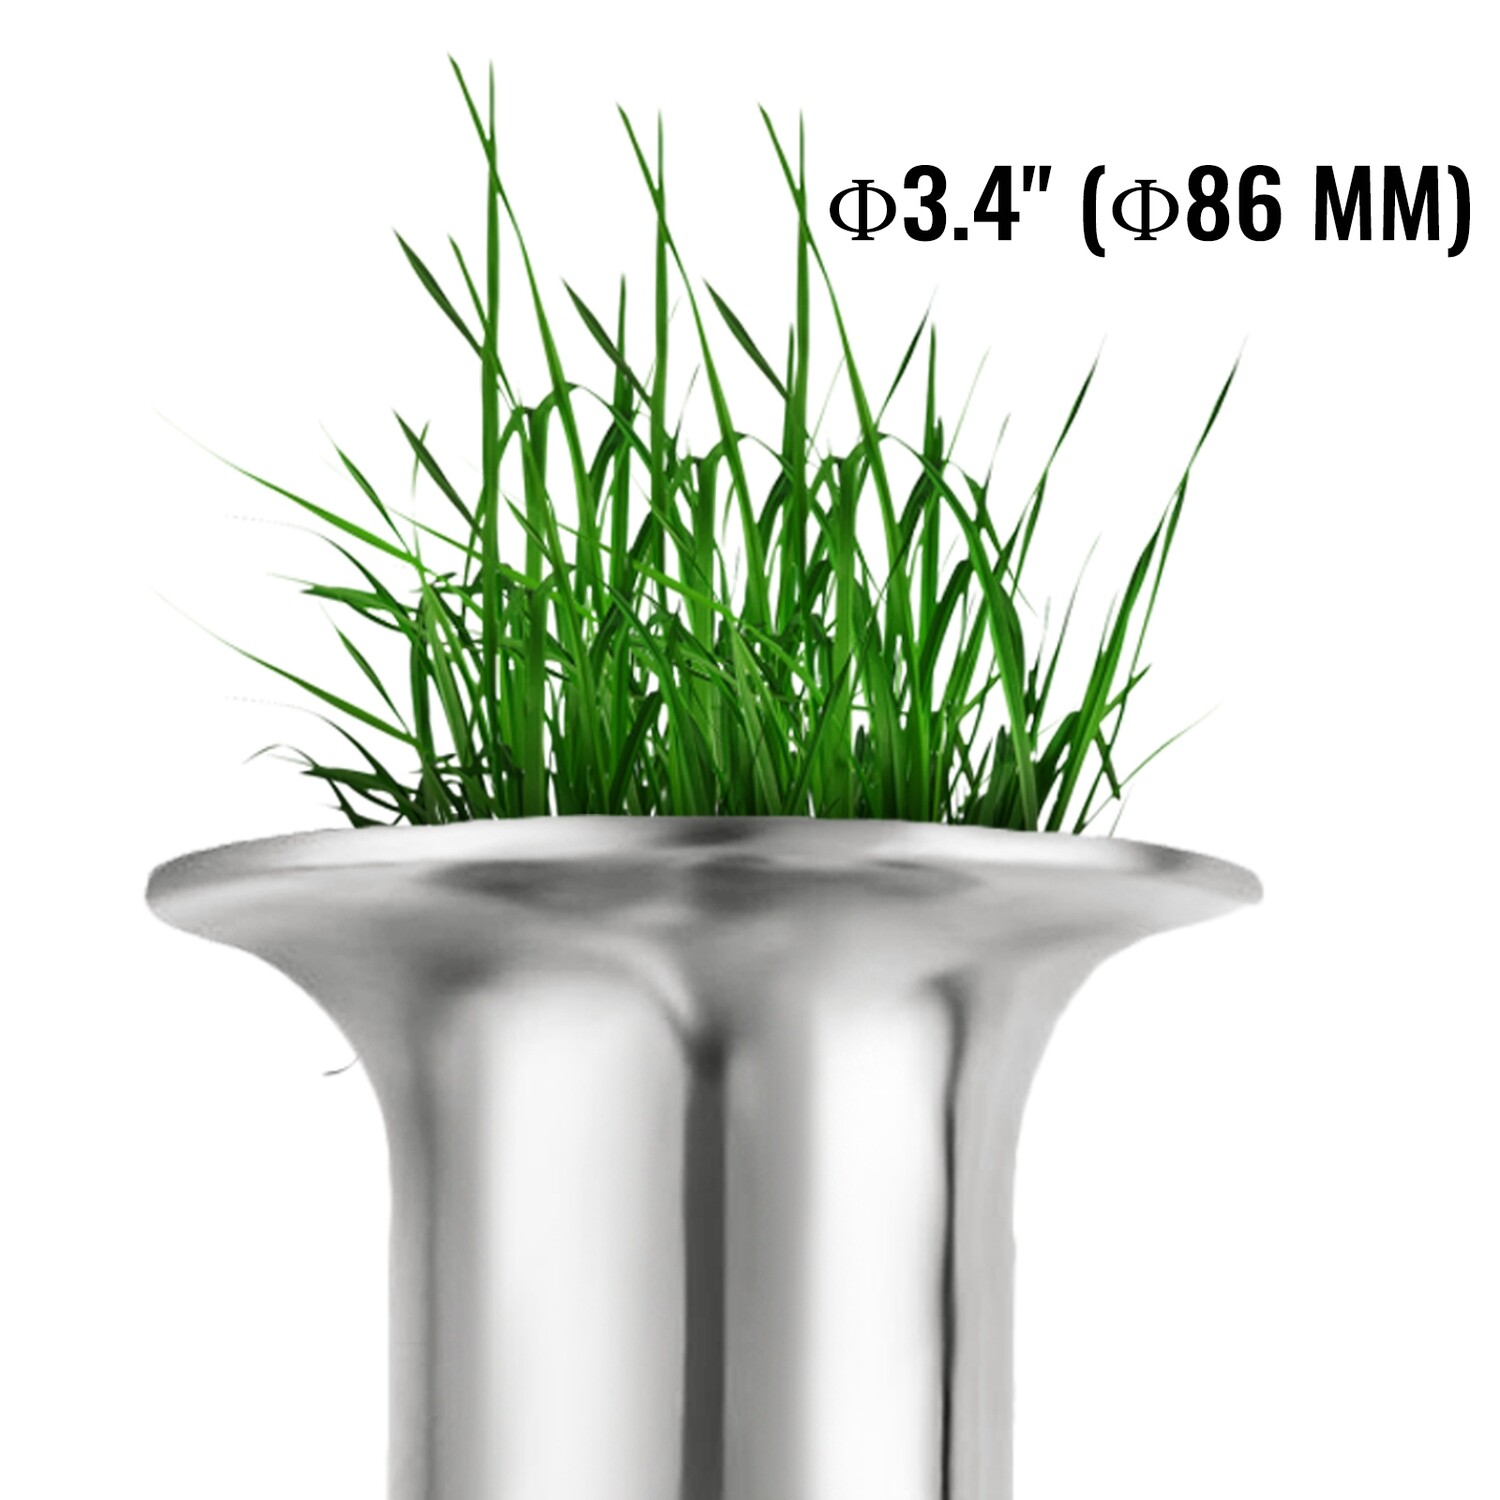 3.7lbs Screw Base Eco Stainless Steel Wheatgrass Manual Juicer Extractor Mincer